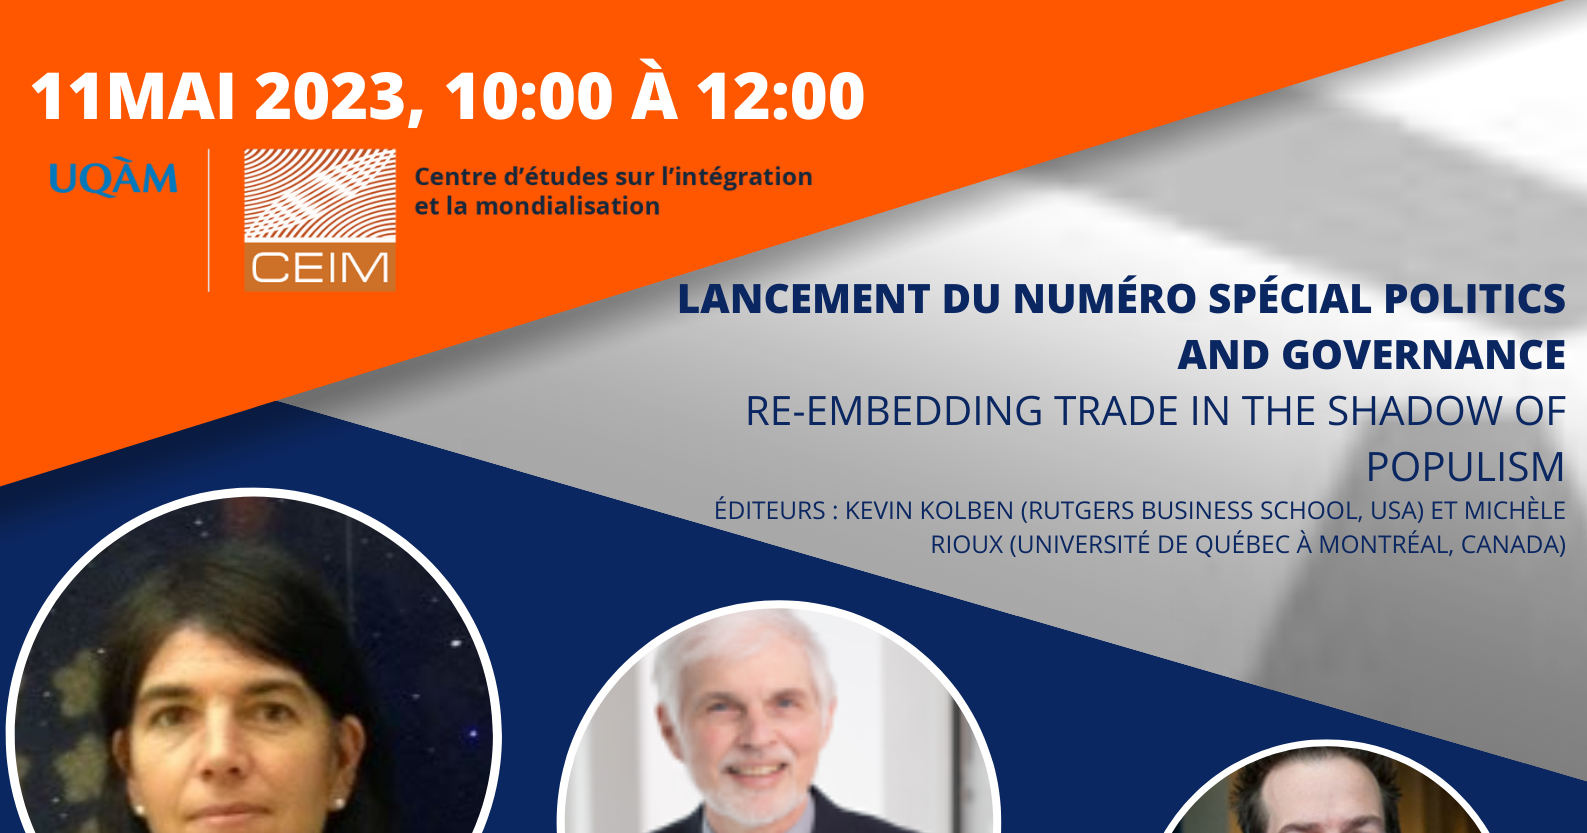 Lancement du numéro spécial Politics and Governance : RE-EMBEDDING TRADE IN THE SHADOW OF POPULISM